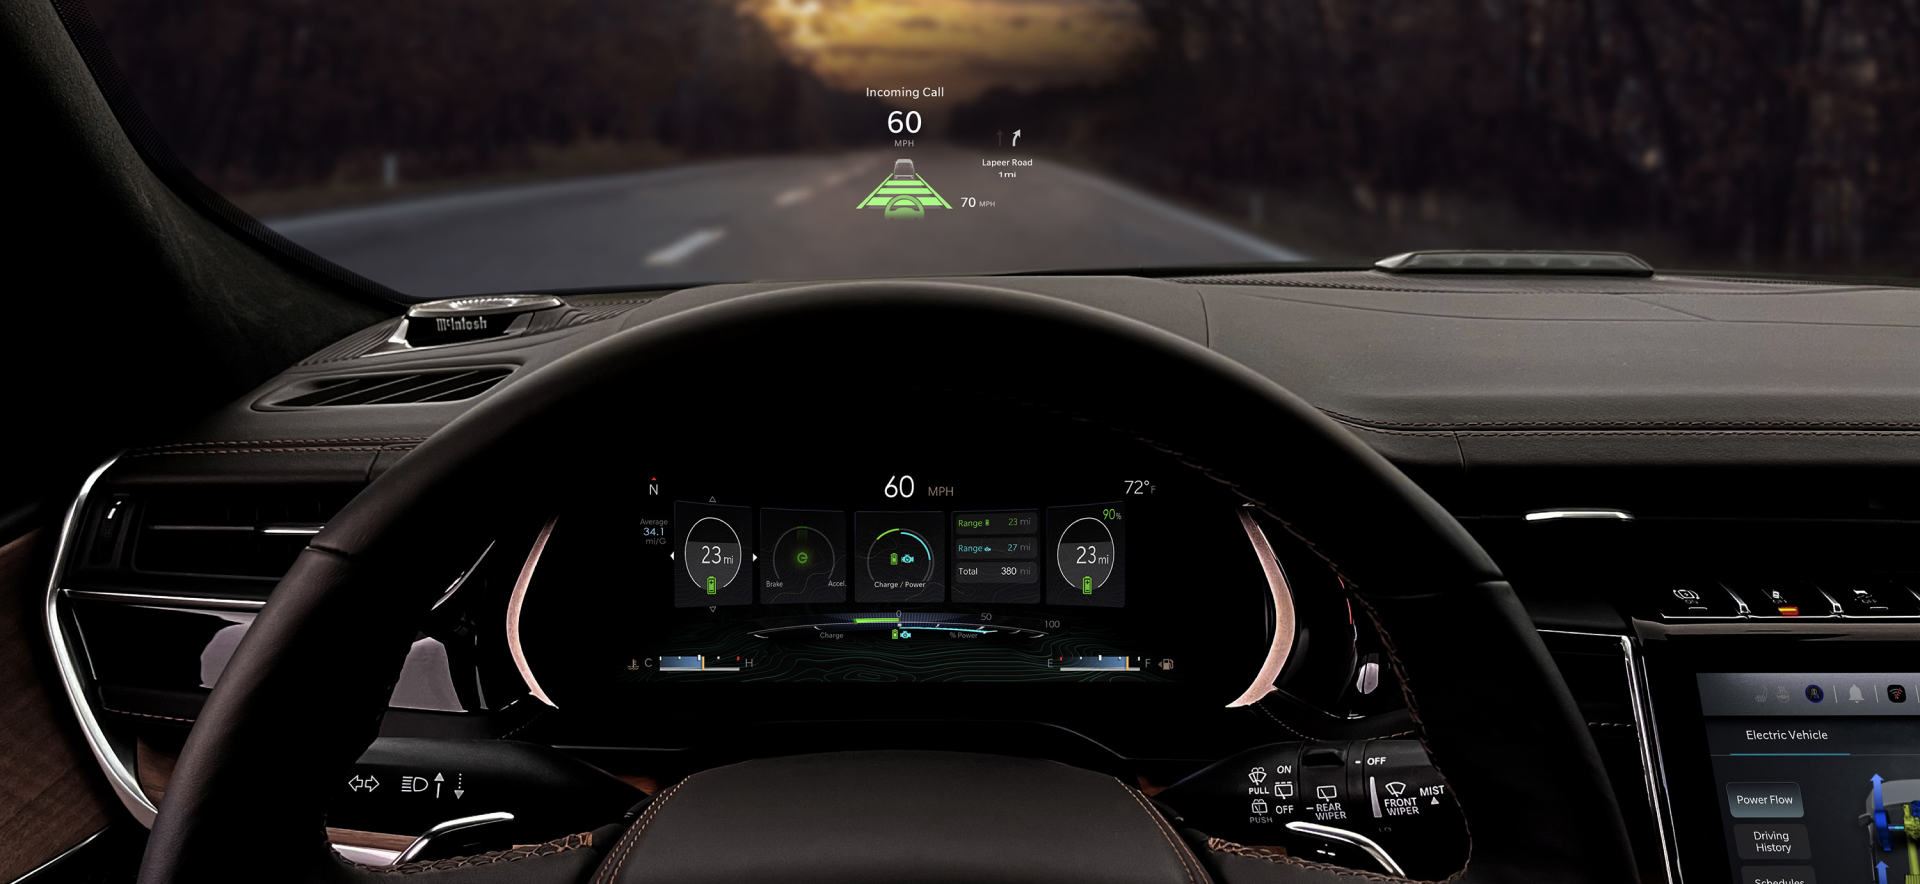 10” Customizable Cluster and Head Up Display